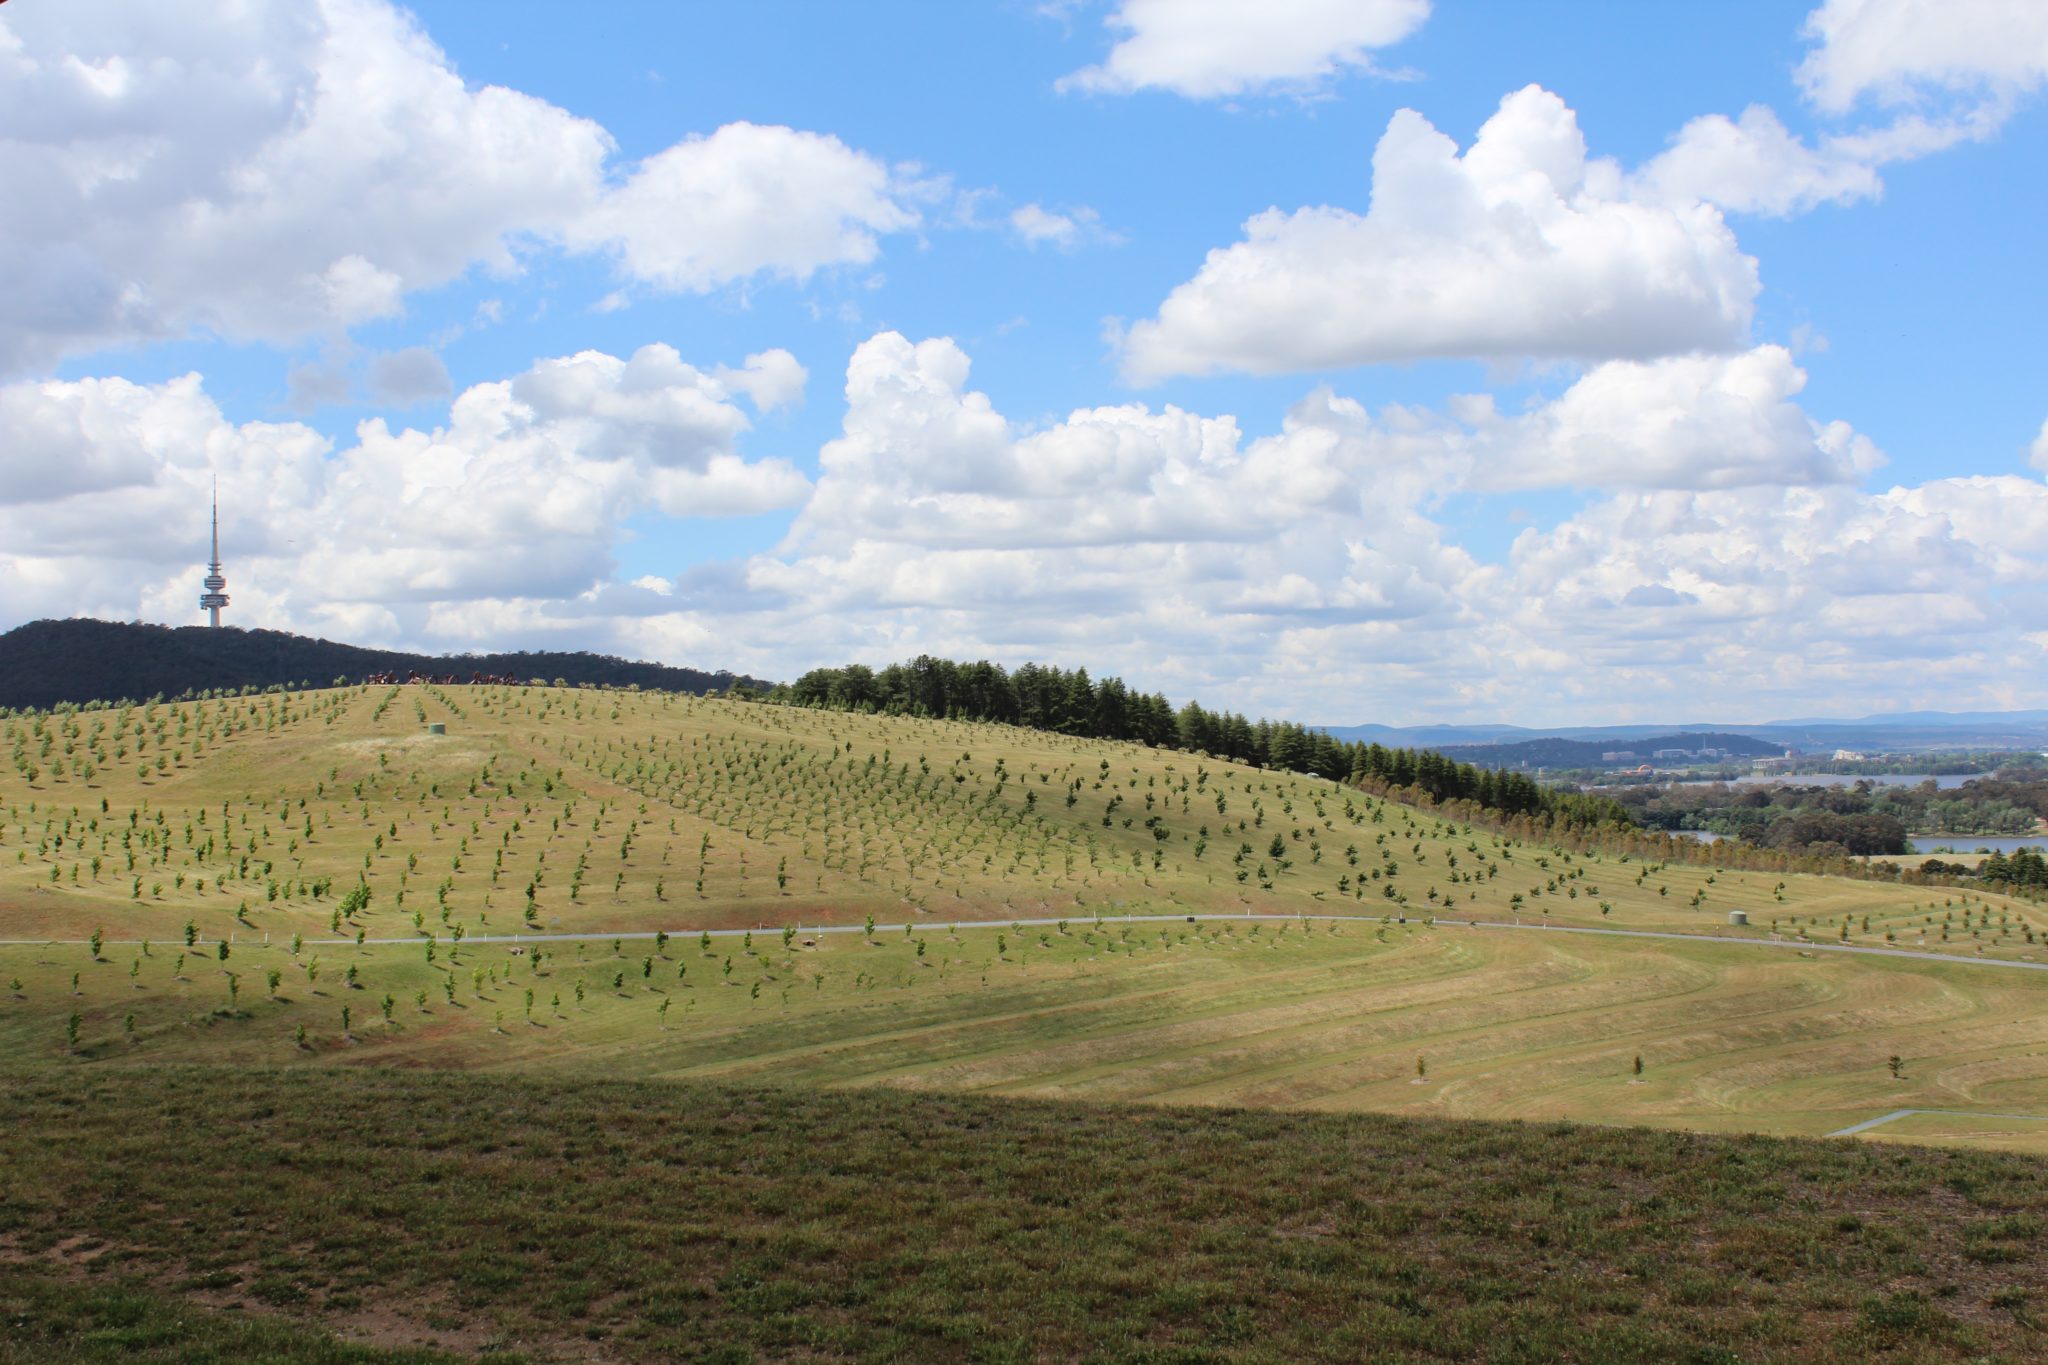 View of Canberra and Black Mountain from the National Arboretum